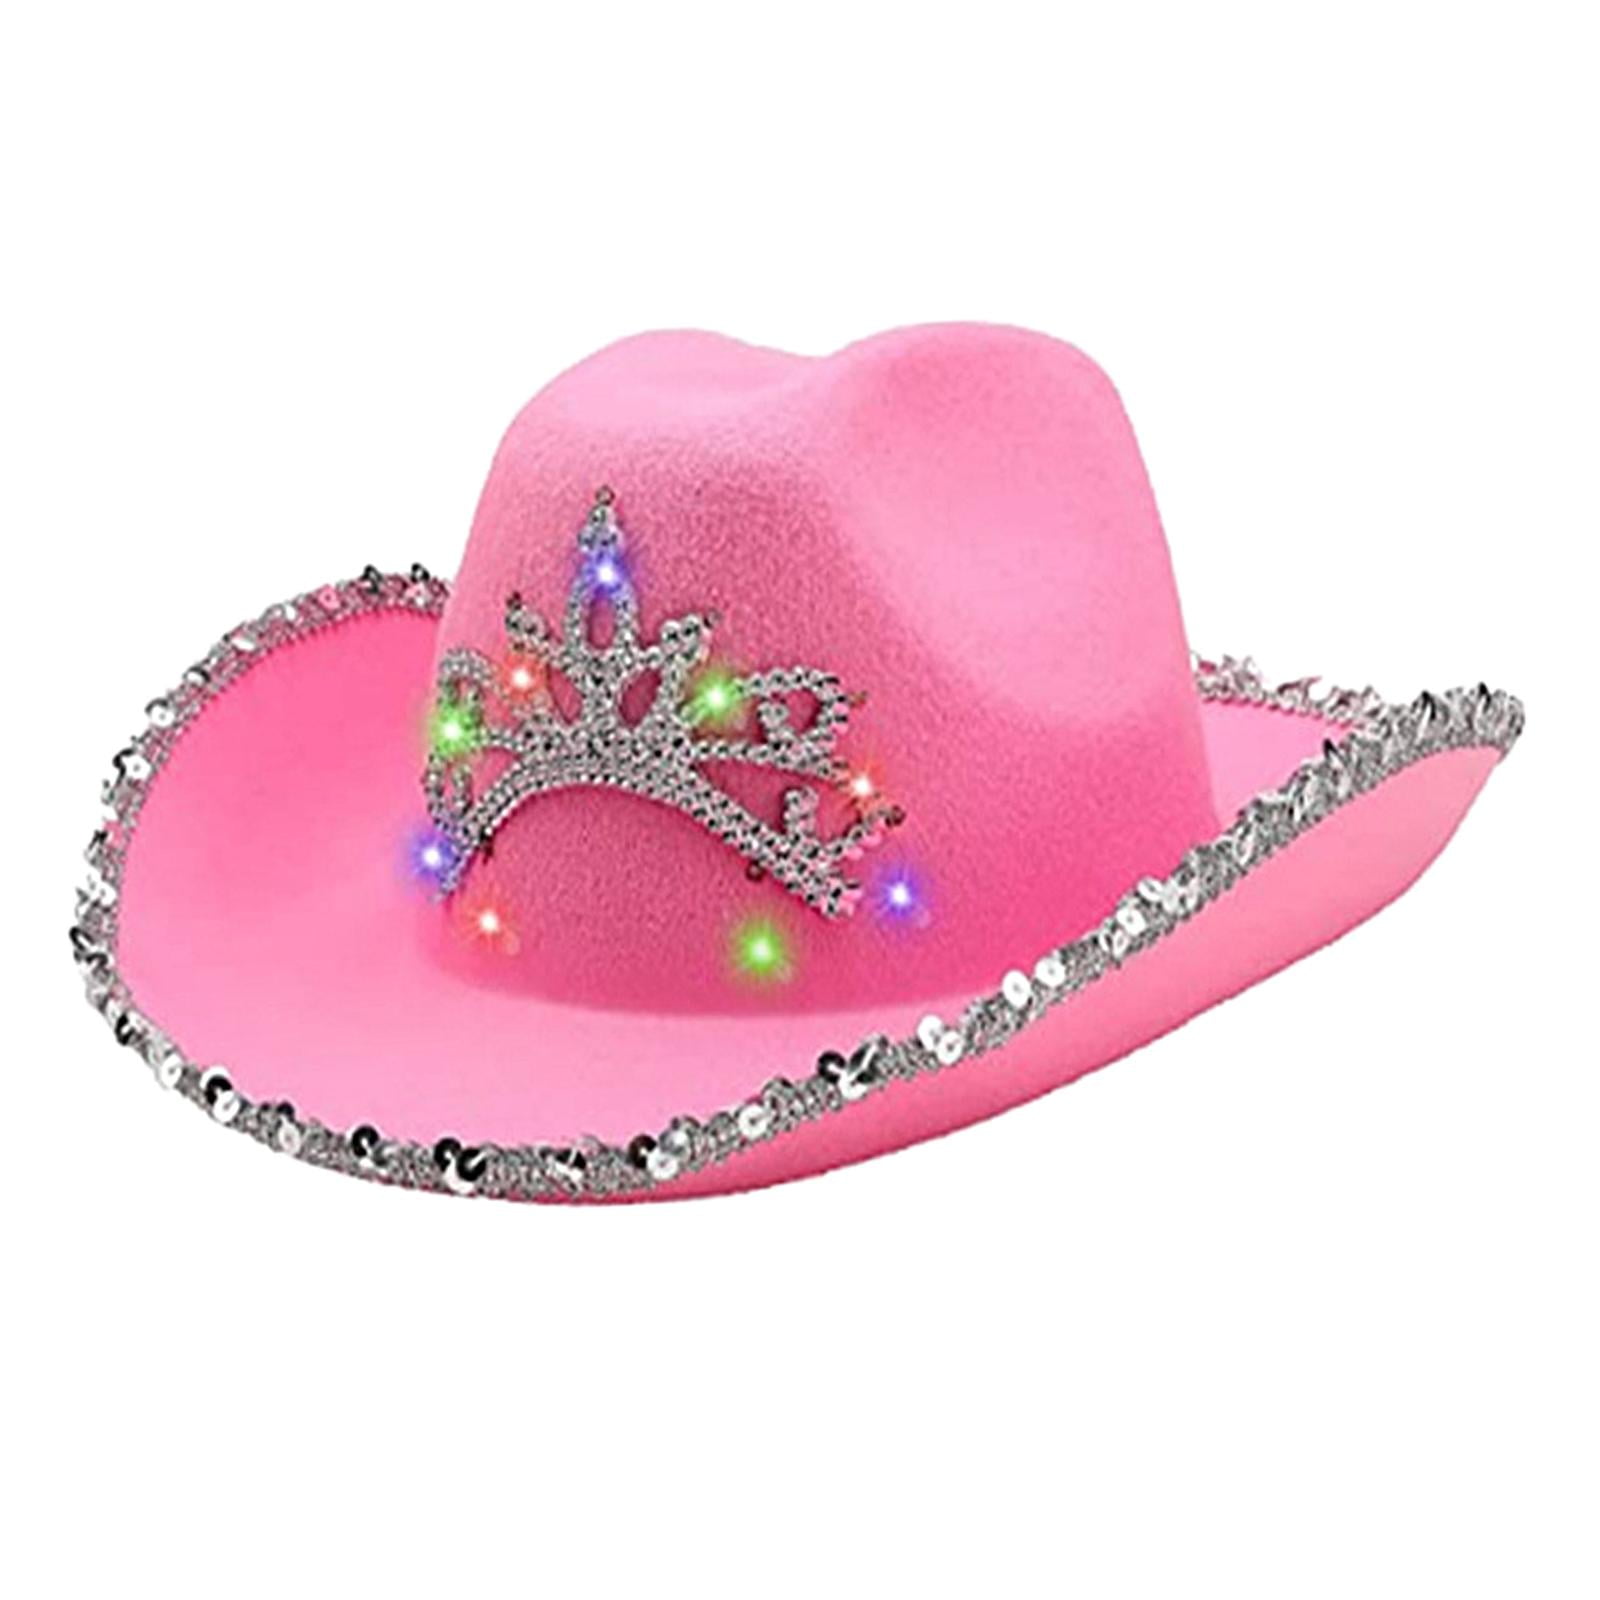 Pink Tiara Cowboy Hat Western Cowgirl Fancy Dress Hen Night Party Accessory New 